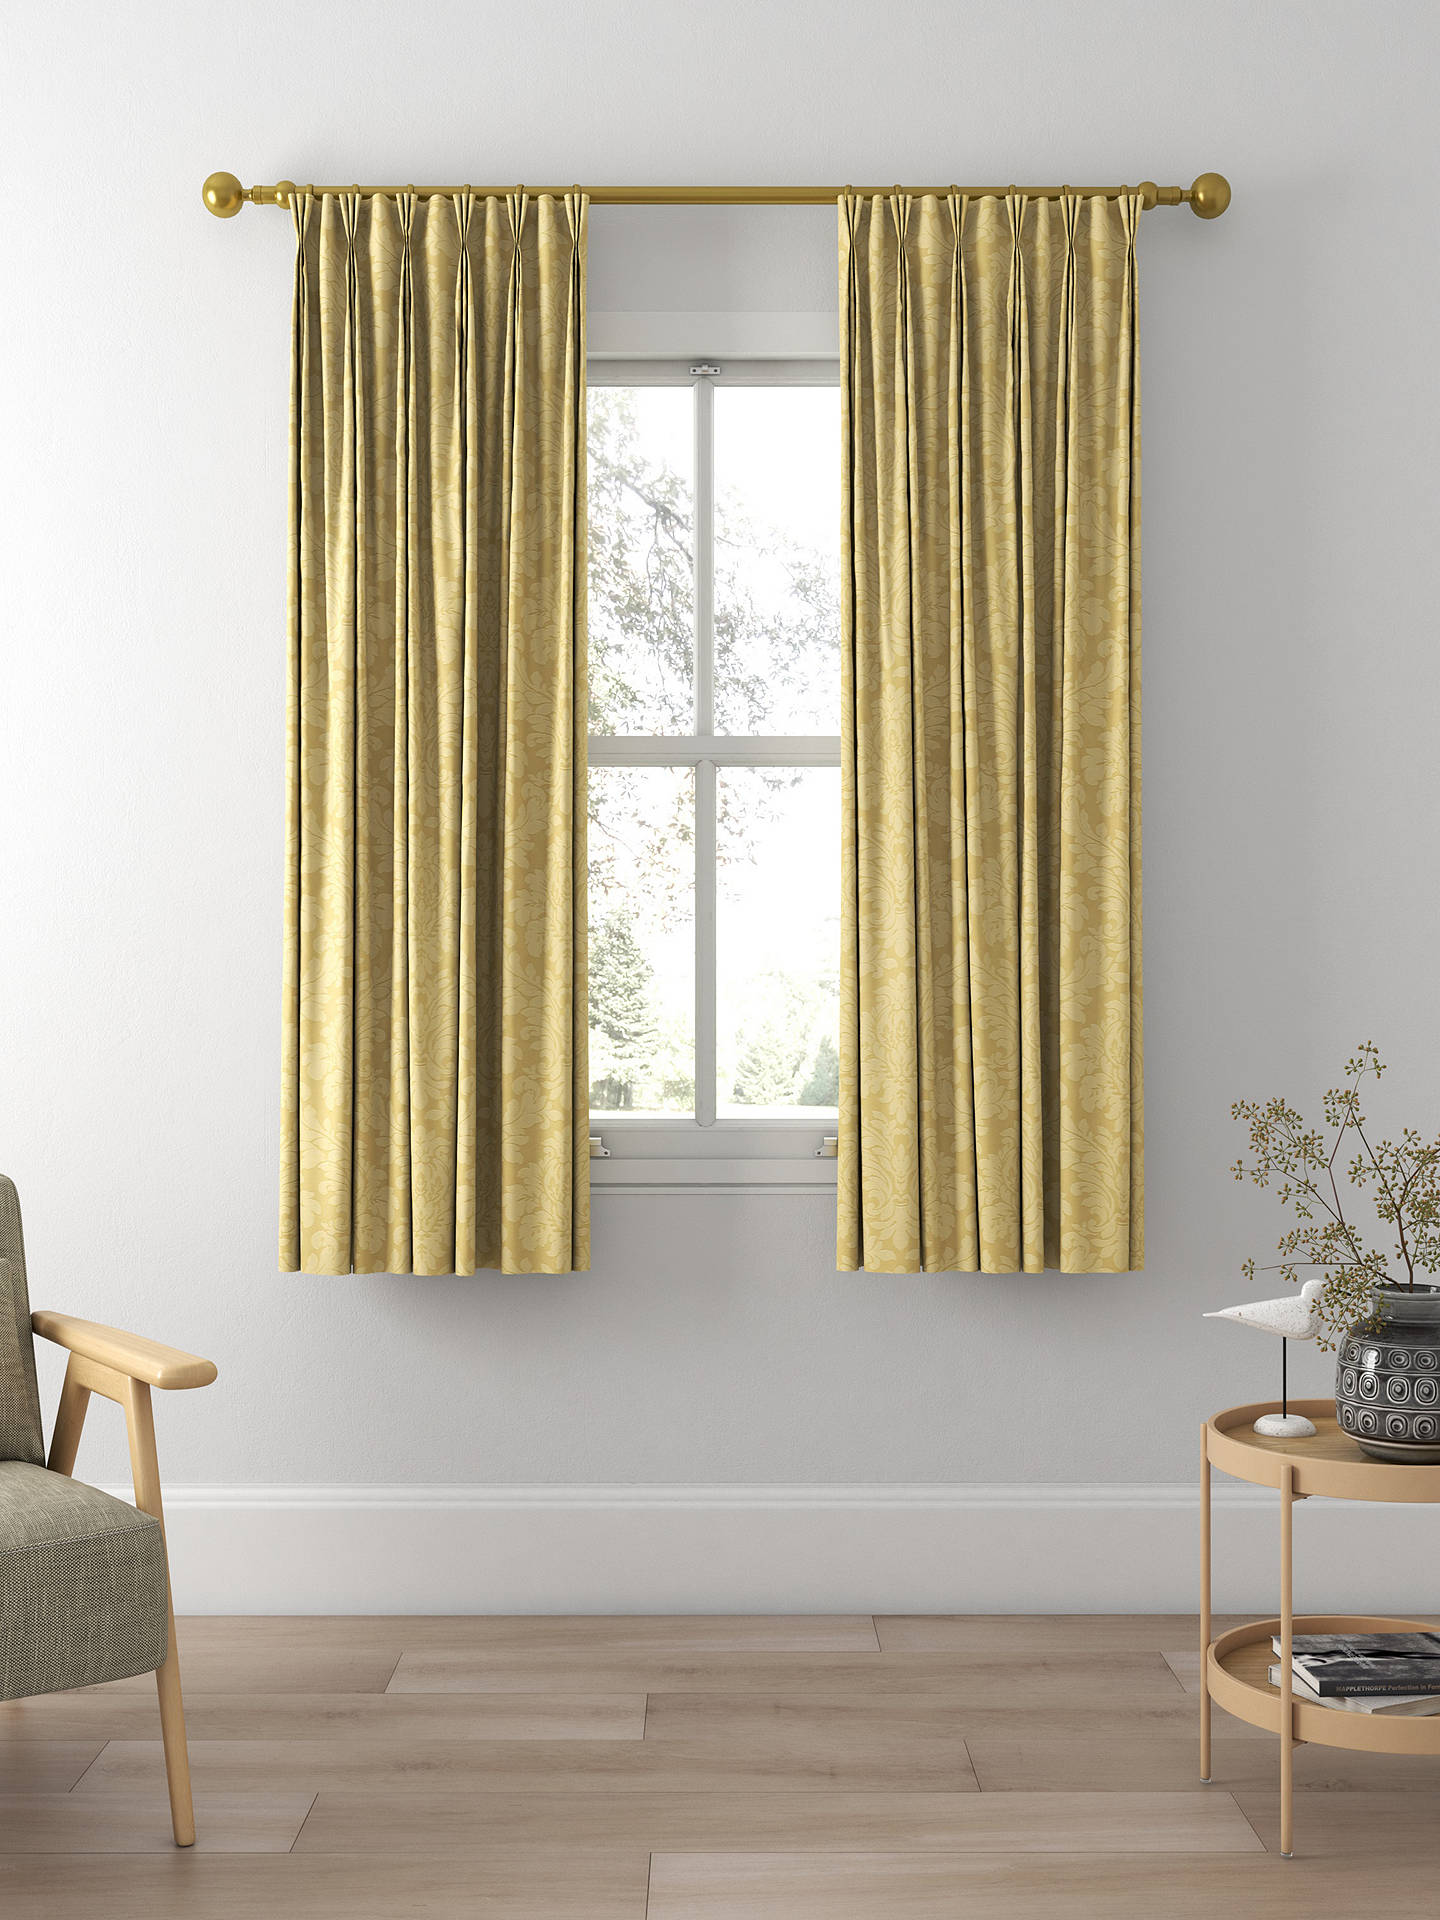 Sanderson Lymington Damask Made to Measure Curtains, Gold